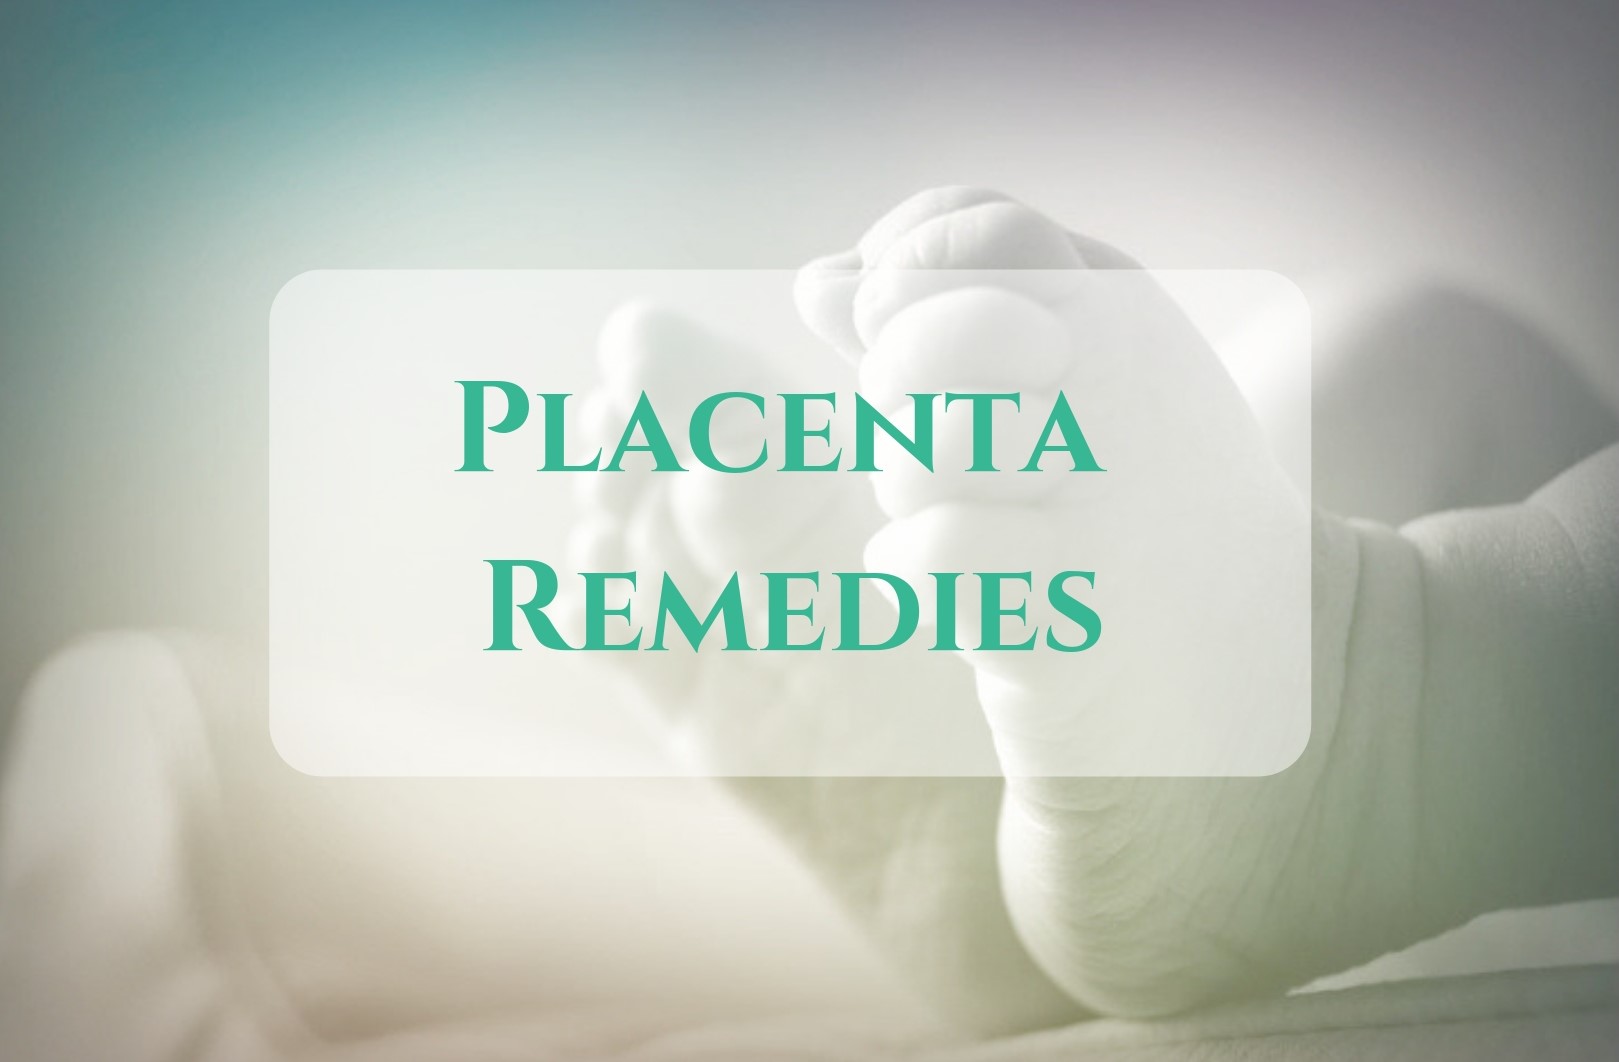 Placenta remedies include pills/capsules, tincture, and homeopathy, available with Placenta Encapsulation from Mo Chuisle